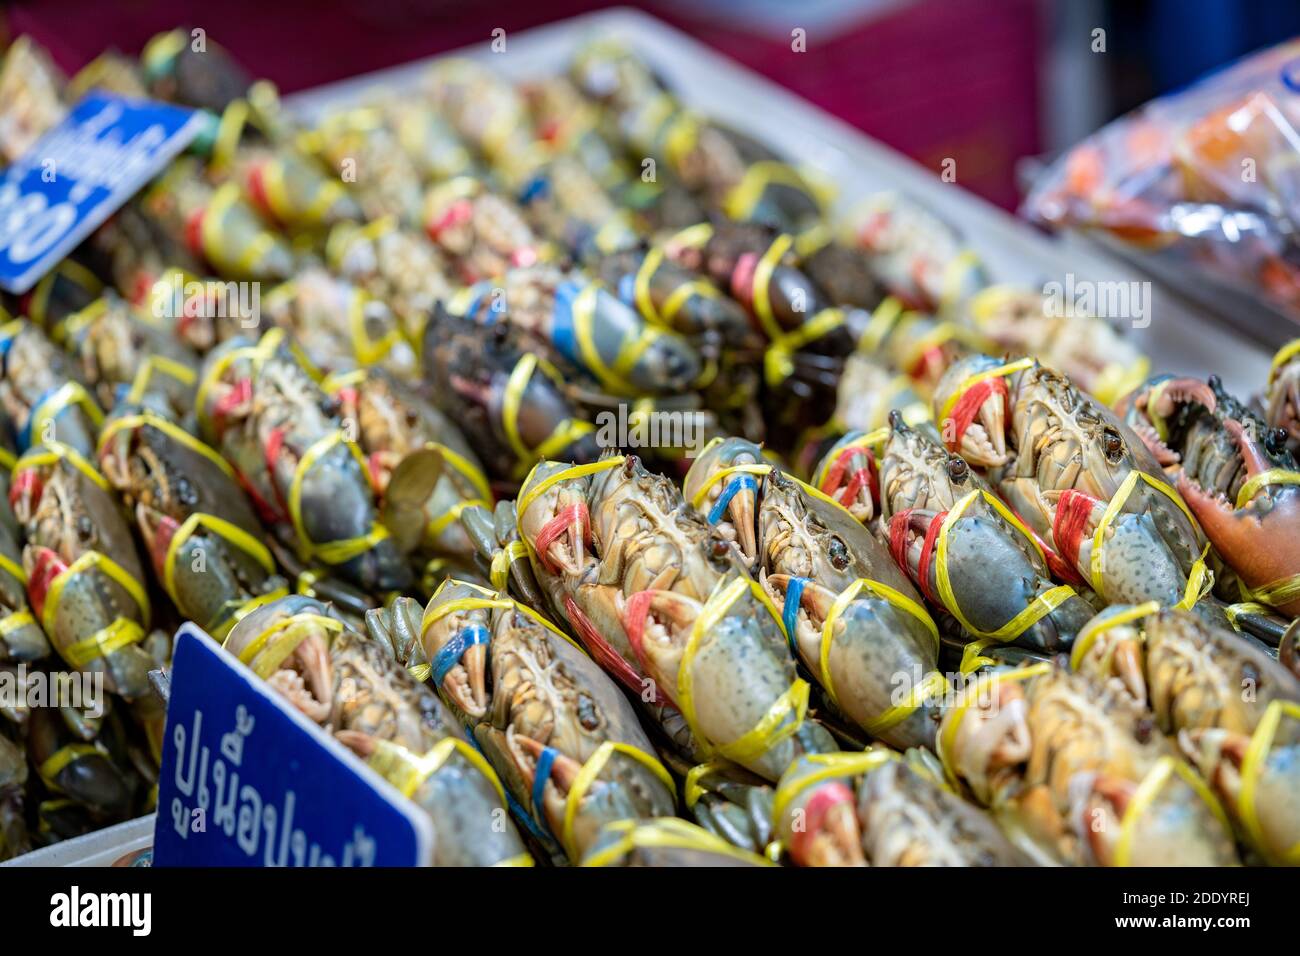 Live Fresh Crab in the fresh Asia market for sale. Large Amounts of Non-English (Thai) Text = 'Crab Meat'. Stock Photo